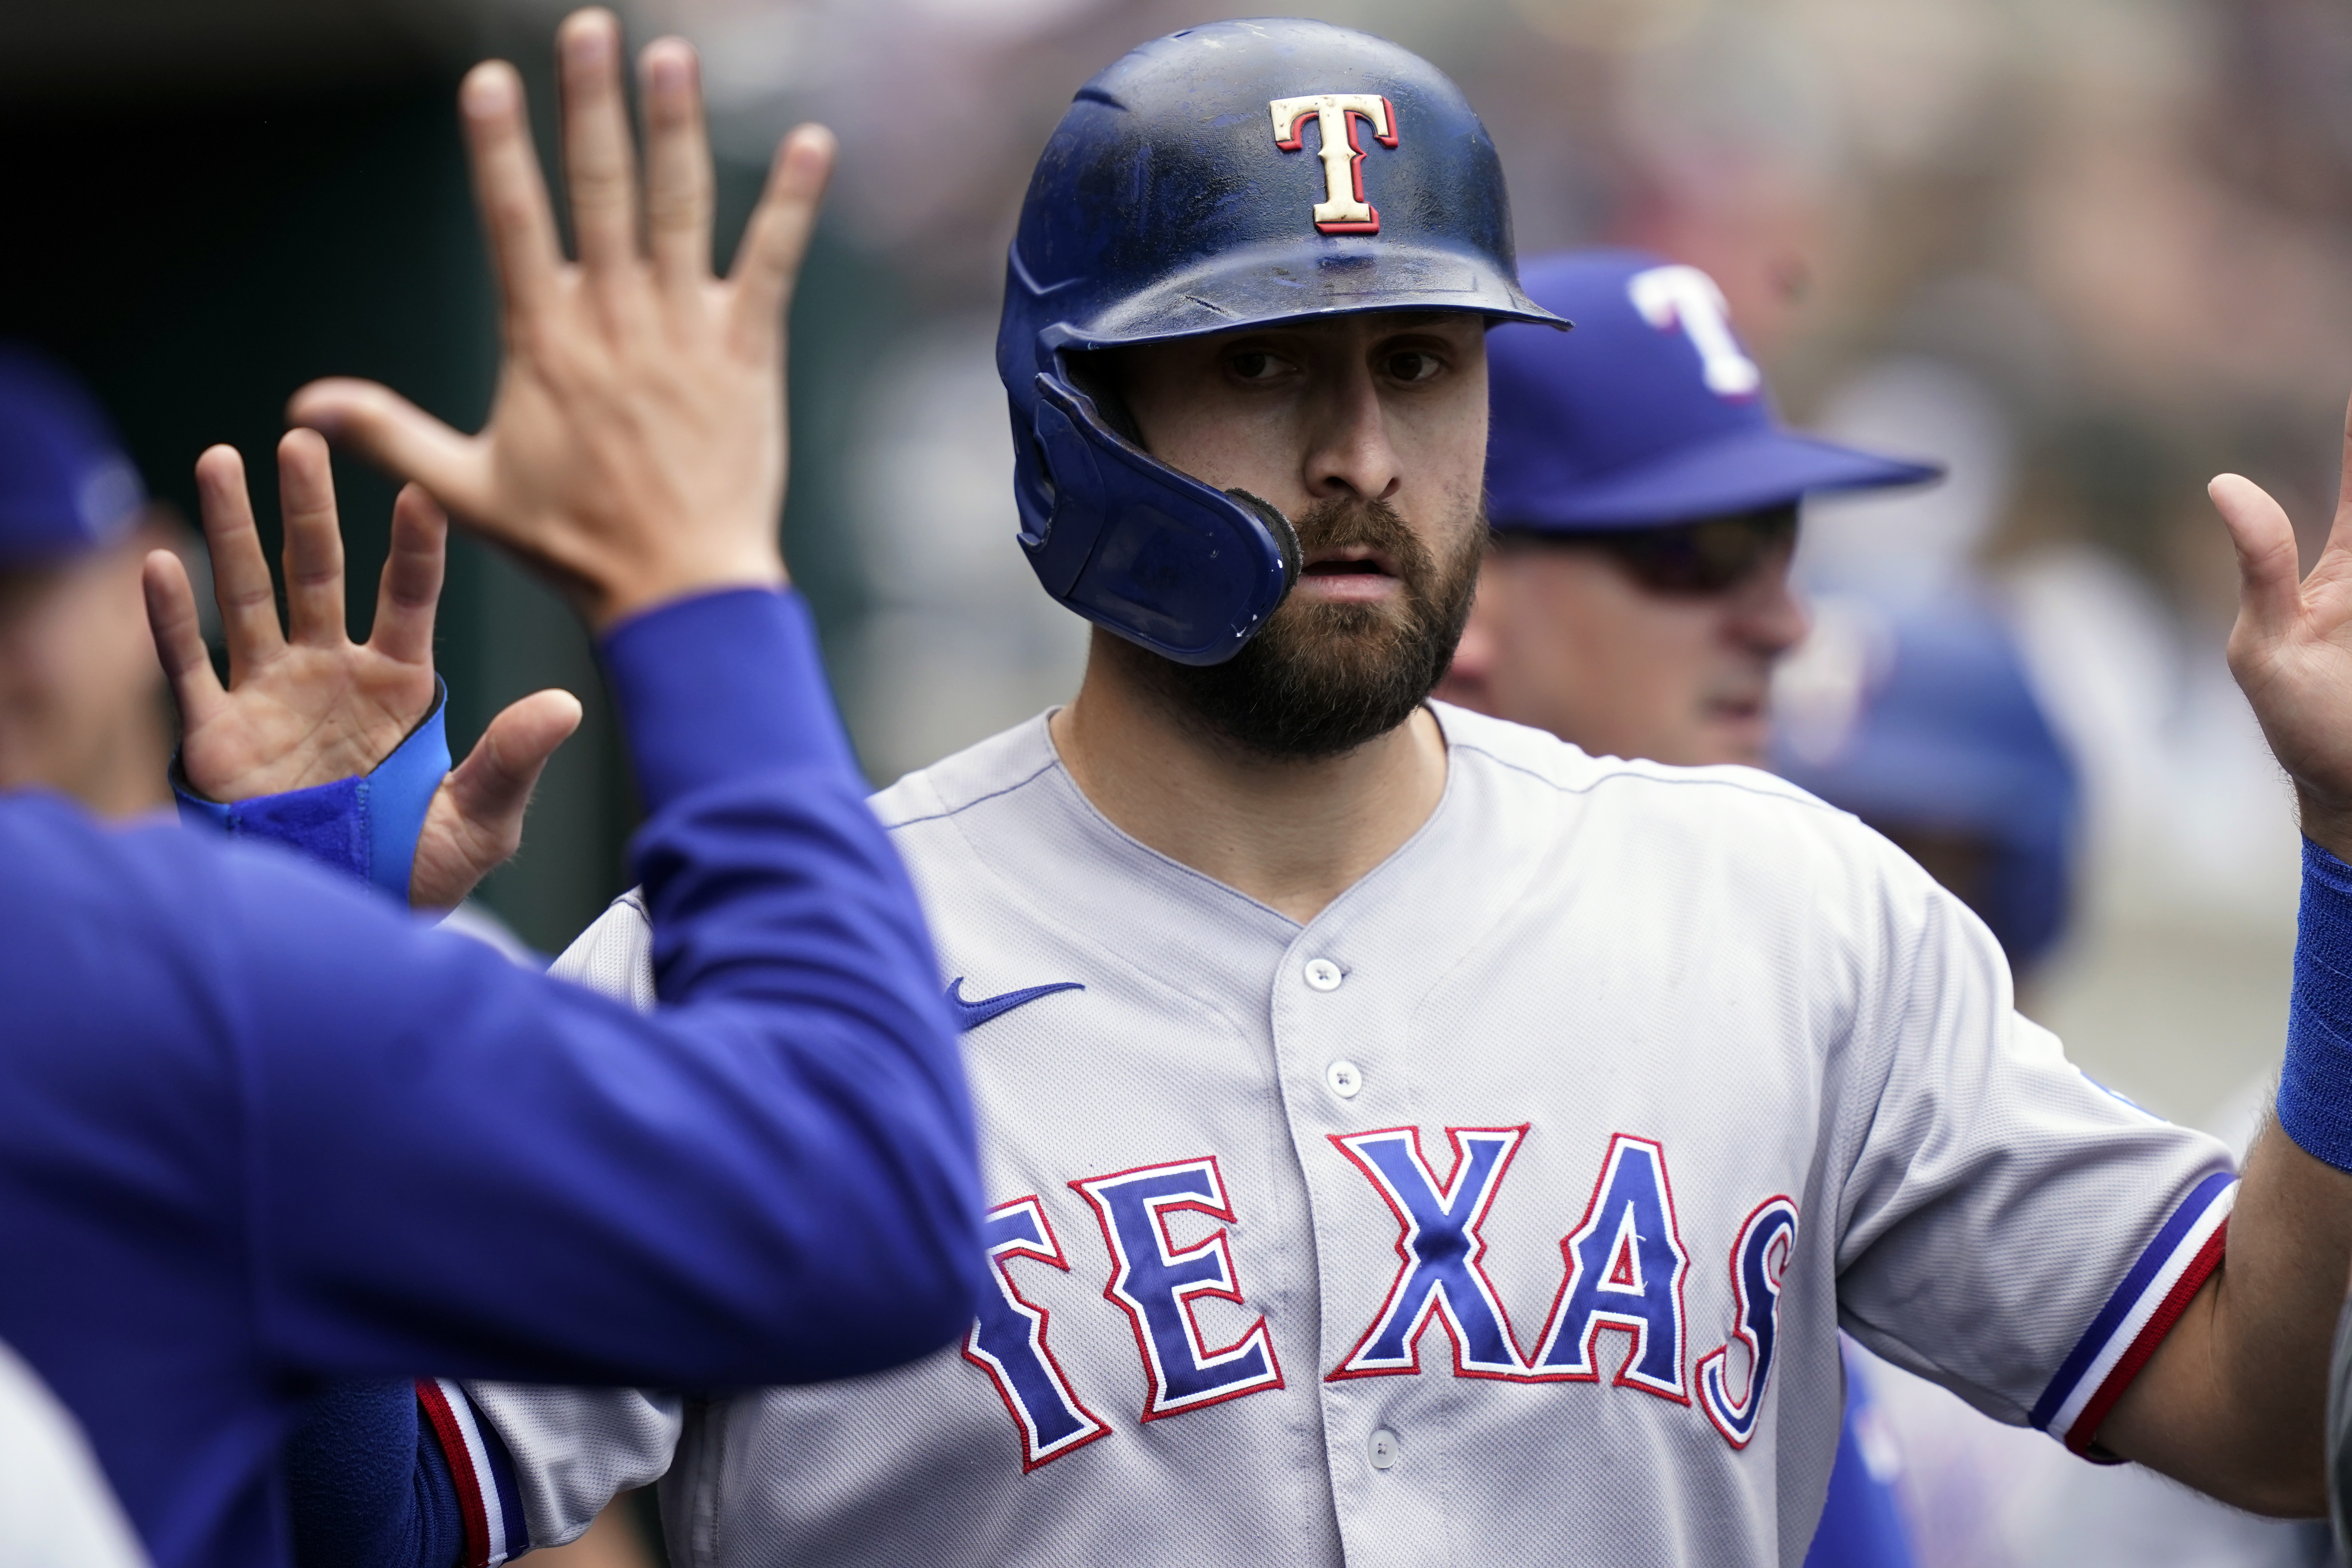 Joey Gallo on his time with Yankees: 'I didn't live up to